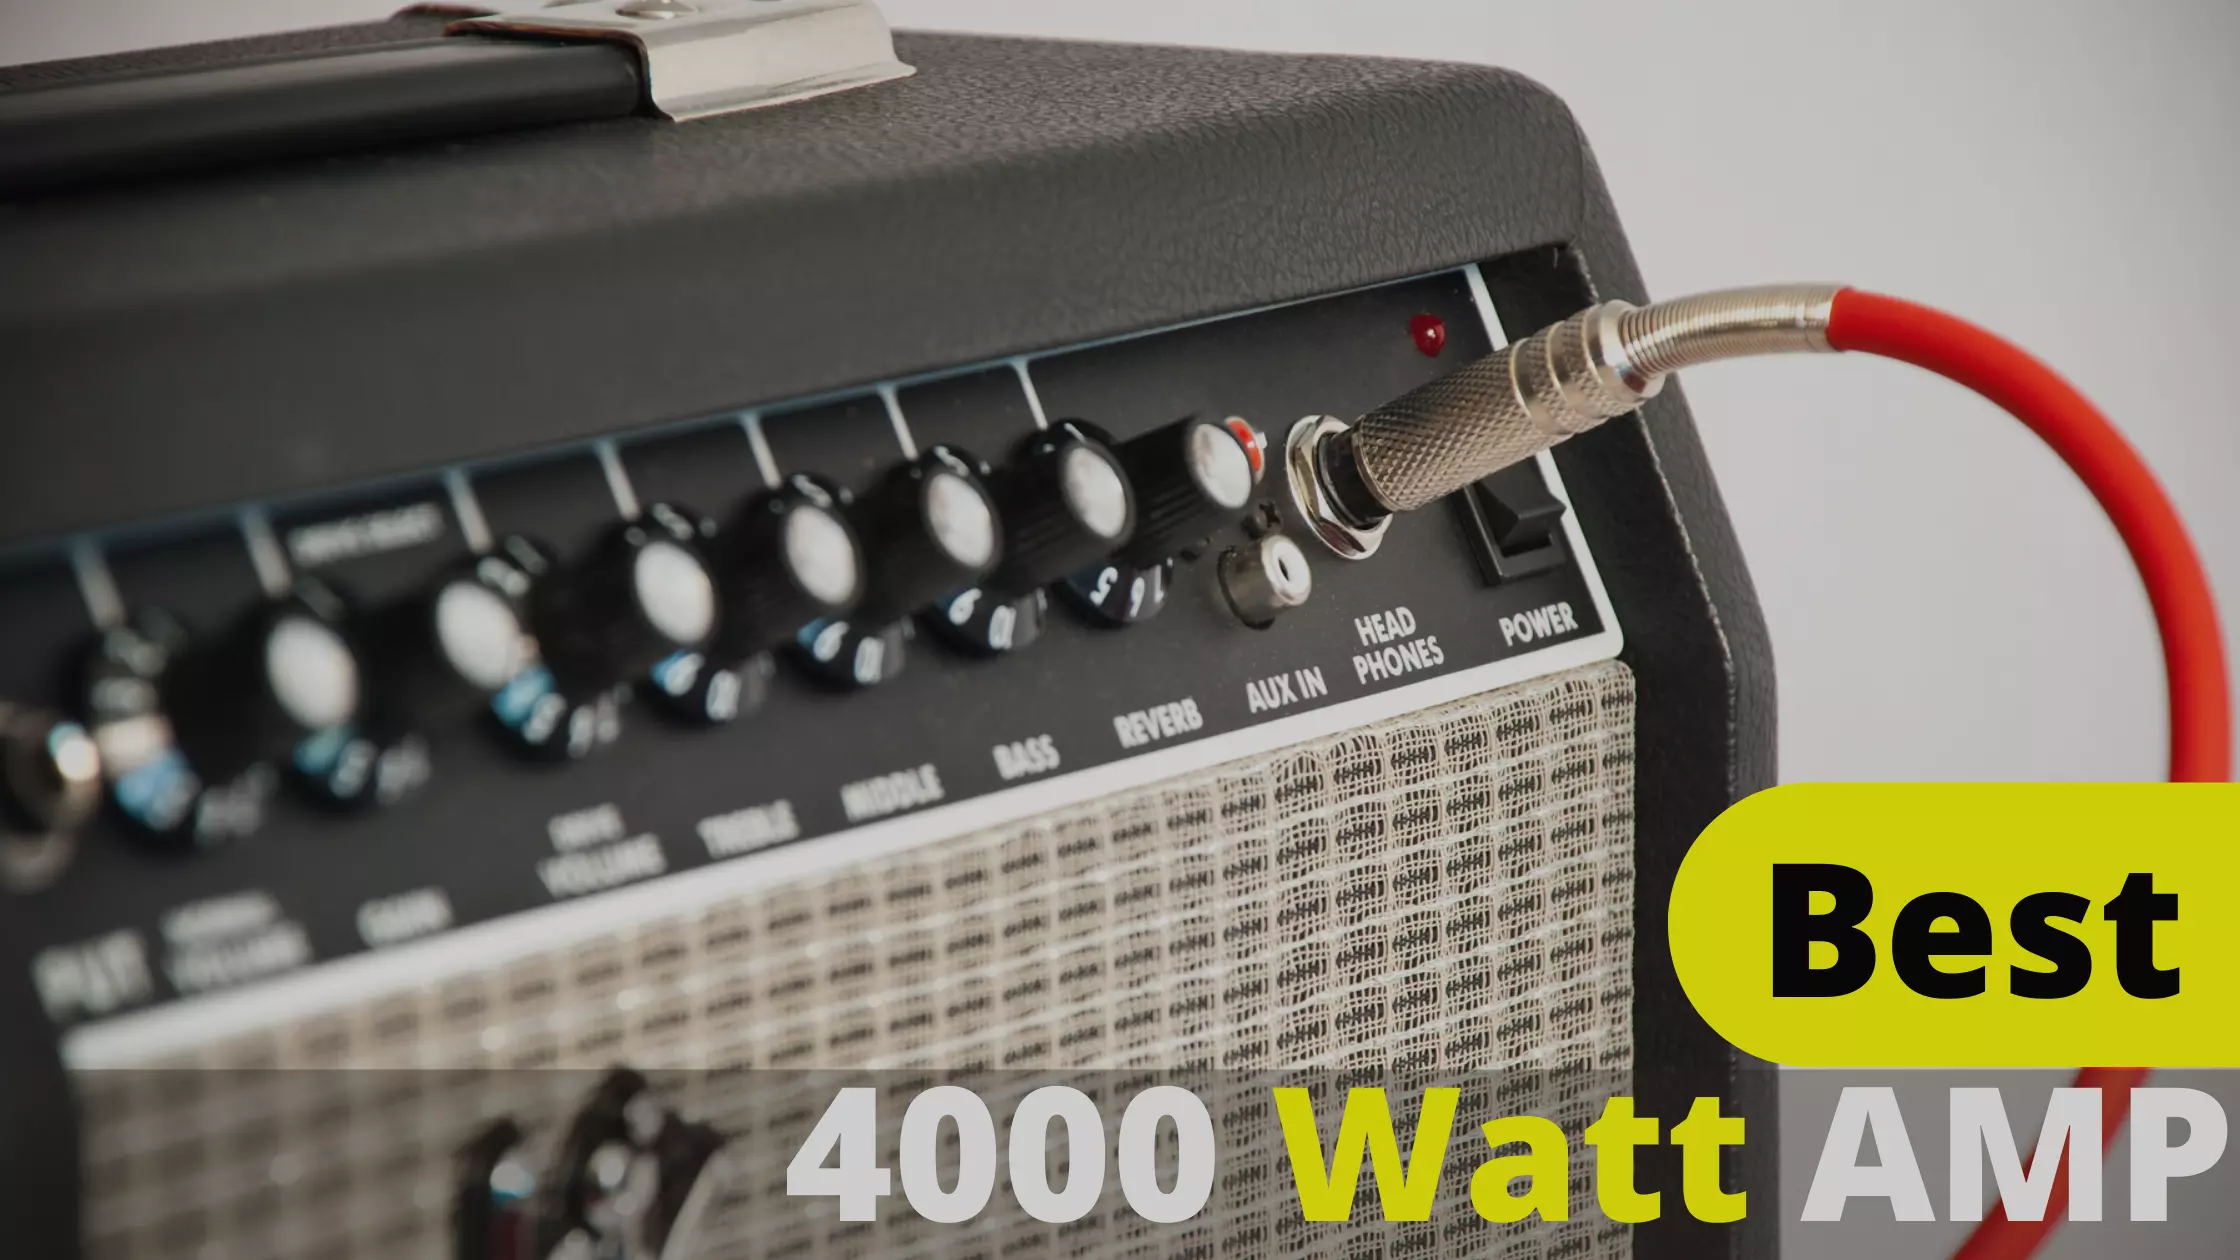 Top 11 Best 4000 Watt Amp Reviews and Buying Guide 2022